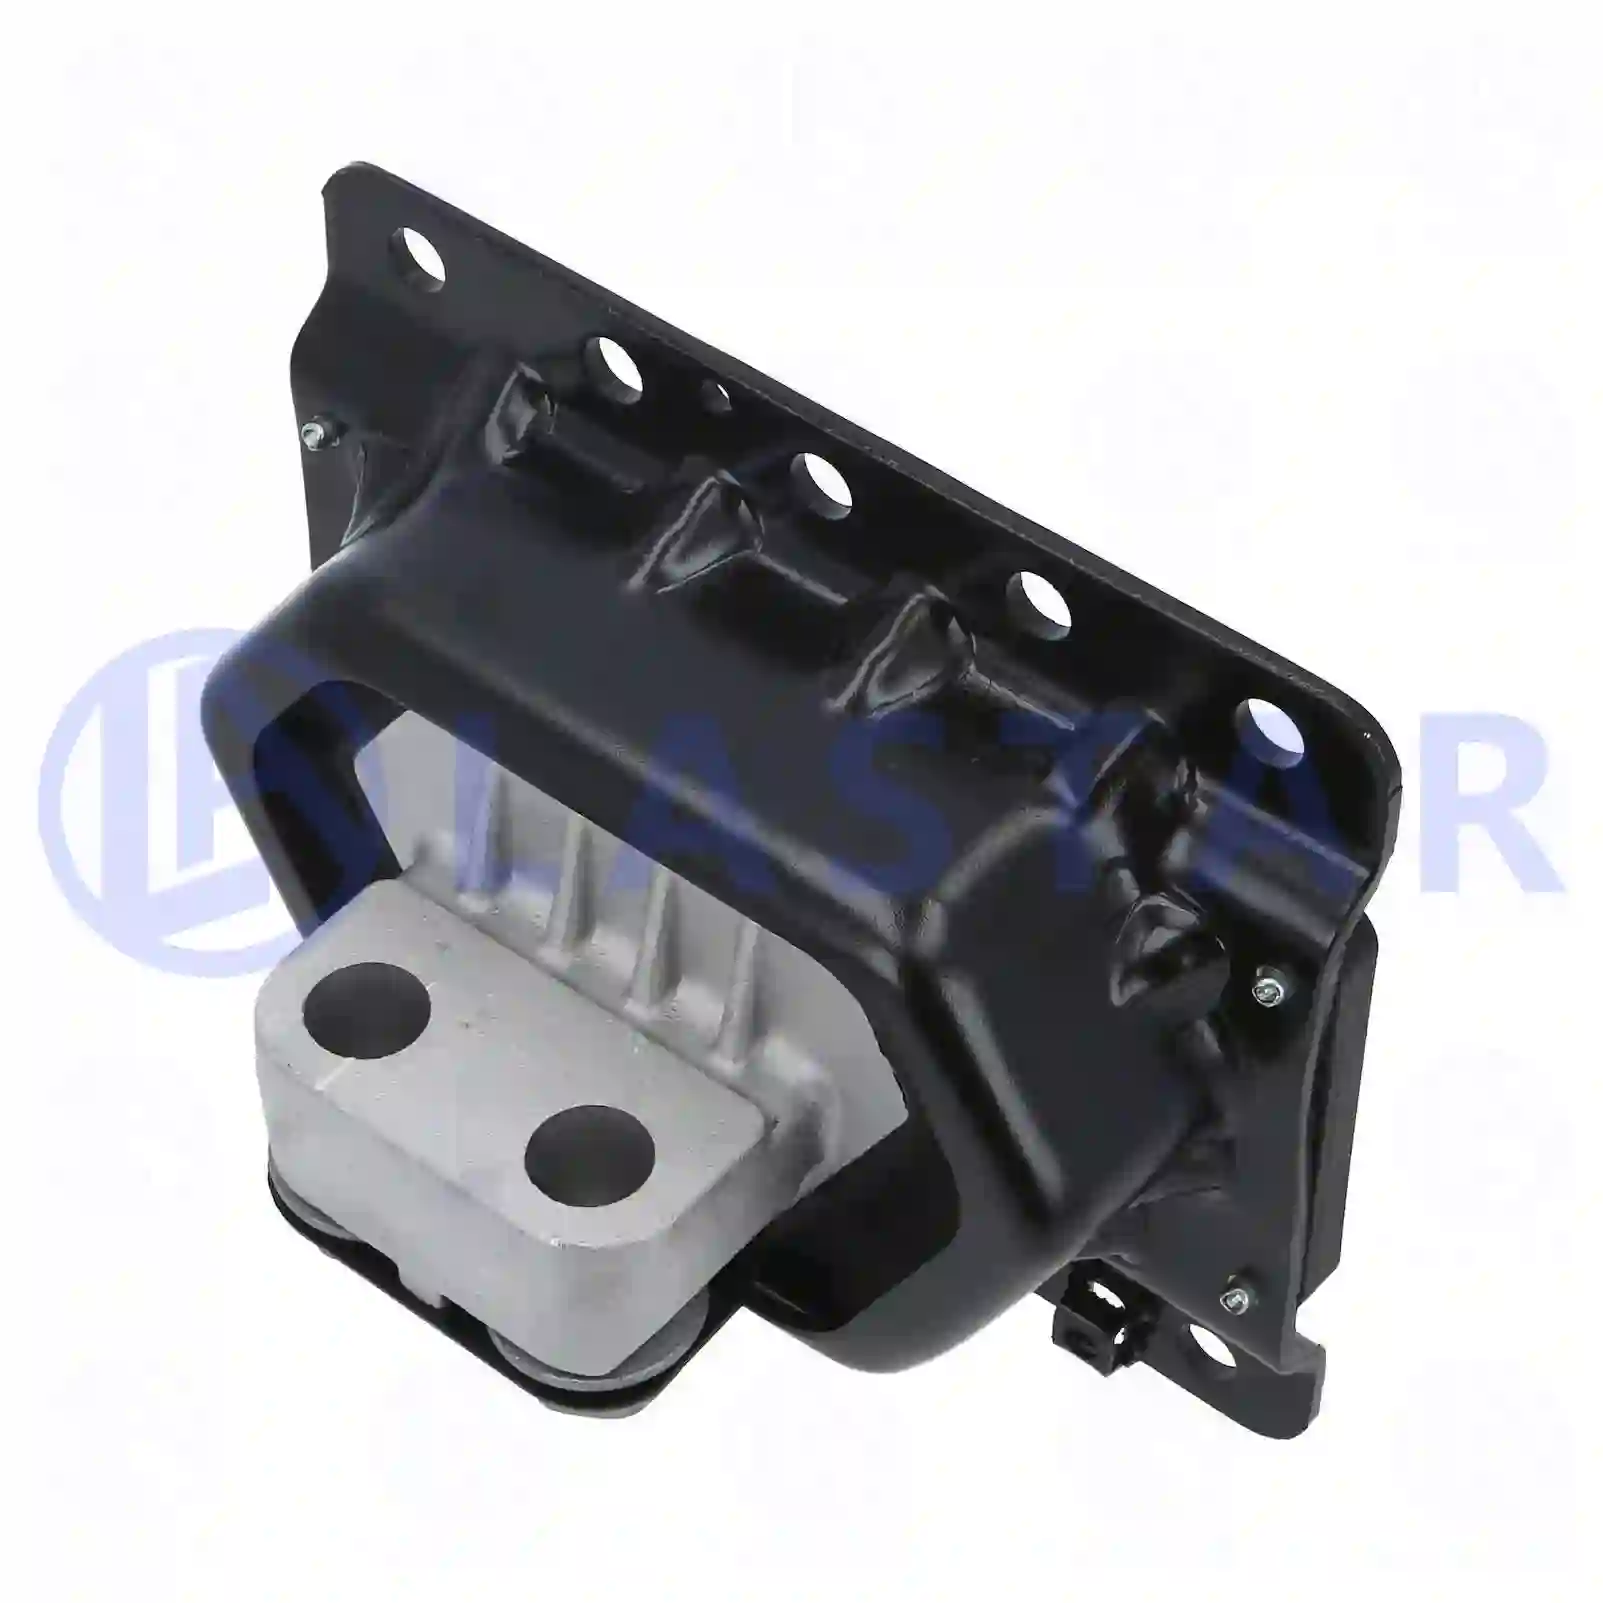 Engine mounting, rear, 77700239, 20723225, 2122815 ||  77700239 Lastar Spare Part | Truck Spare Parts, Auotomotive Spare Parts Engine mounting, rear, 77700239, 20723225, 2122815 ||  77700239 Lastar Spare Part | Truck Spare Parts, Auotomotive Spare Parts